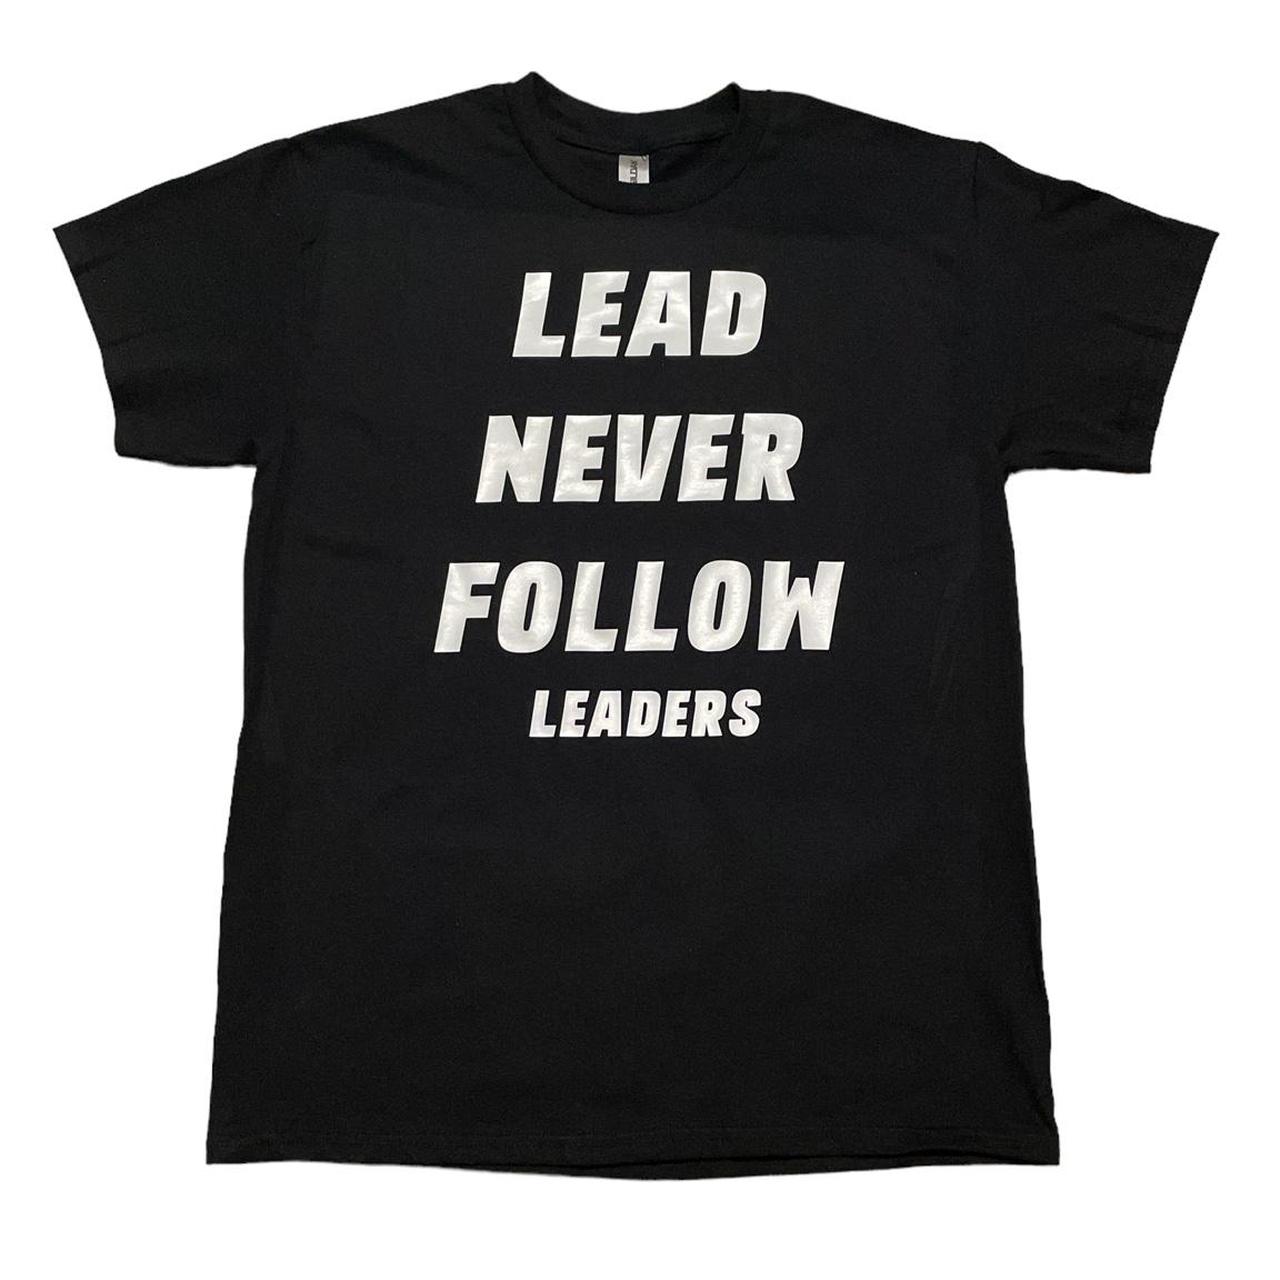 Chief keef Lead never follow t-shirt (Black) Prices - Depop